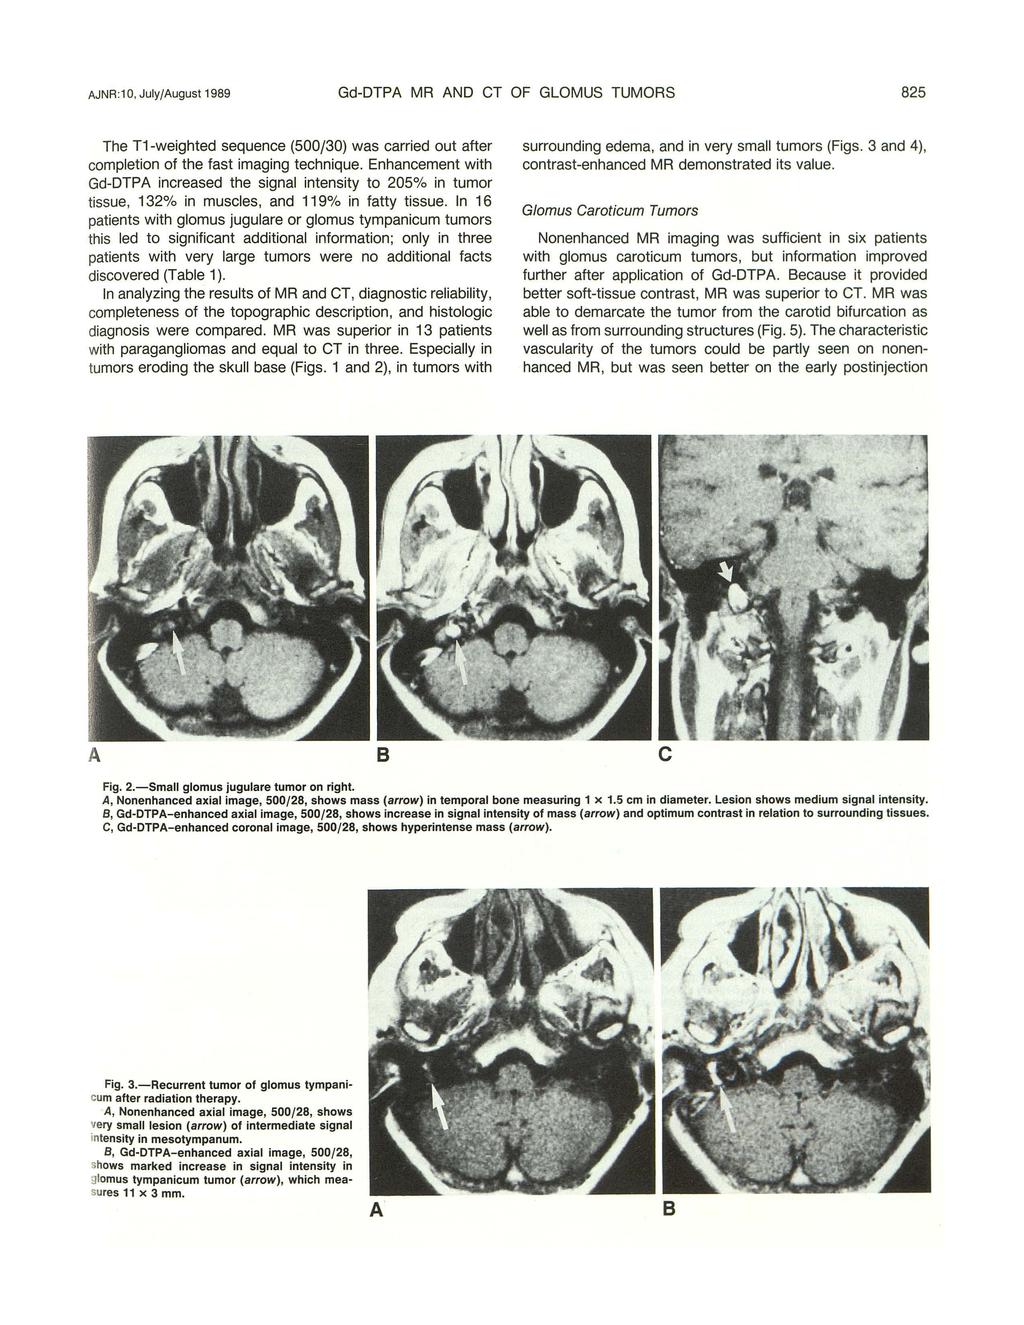 AJNR:1 0, July/August 1989 Gd-DTPA MR AND CT OF GLOMUS TUMORS 85 The T1-weighted sequence (500/30) was carried out after completion of the fast imaging technique.